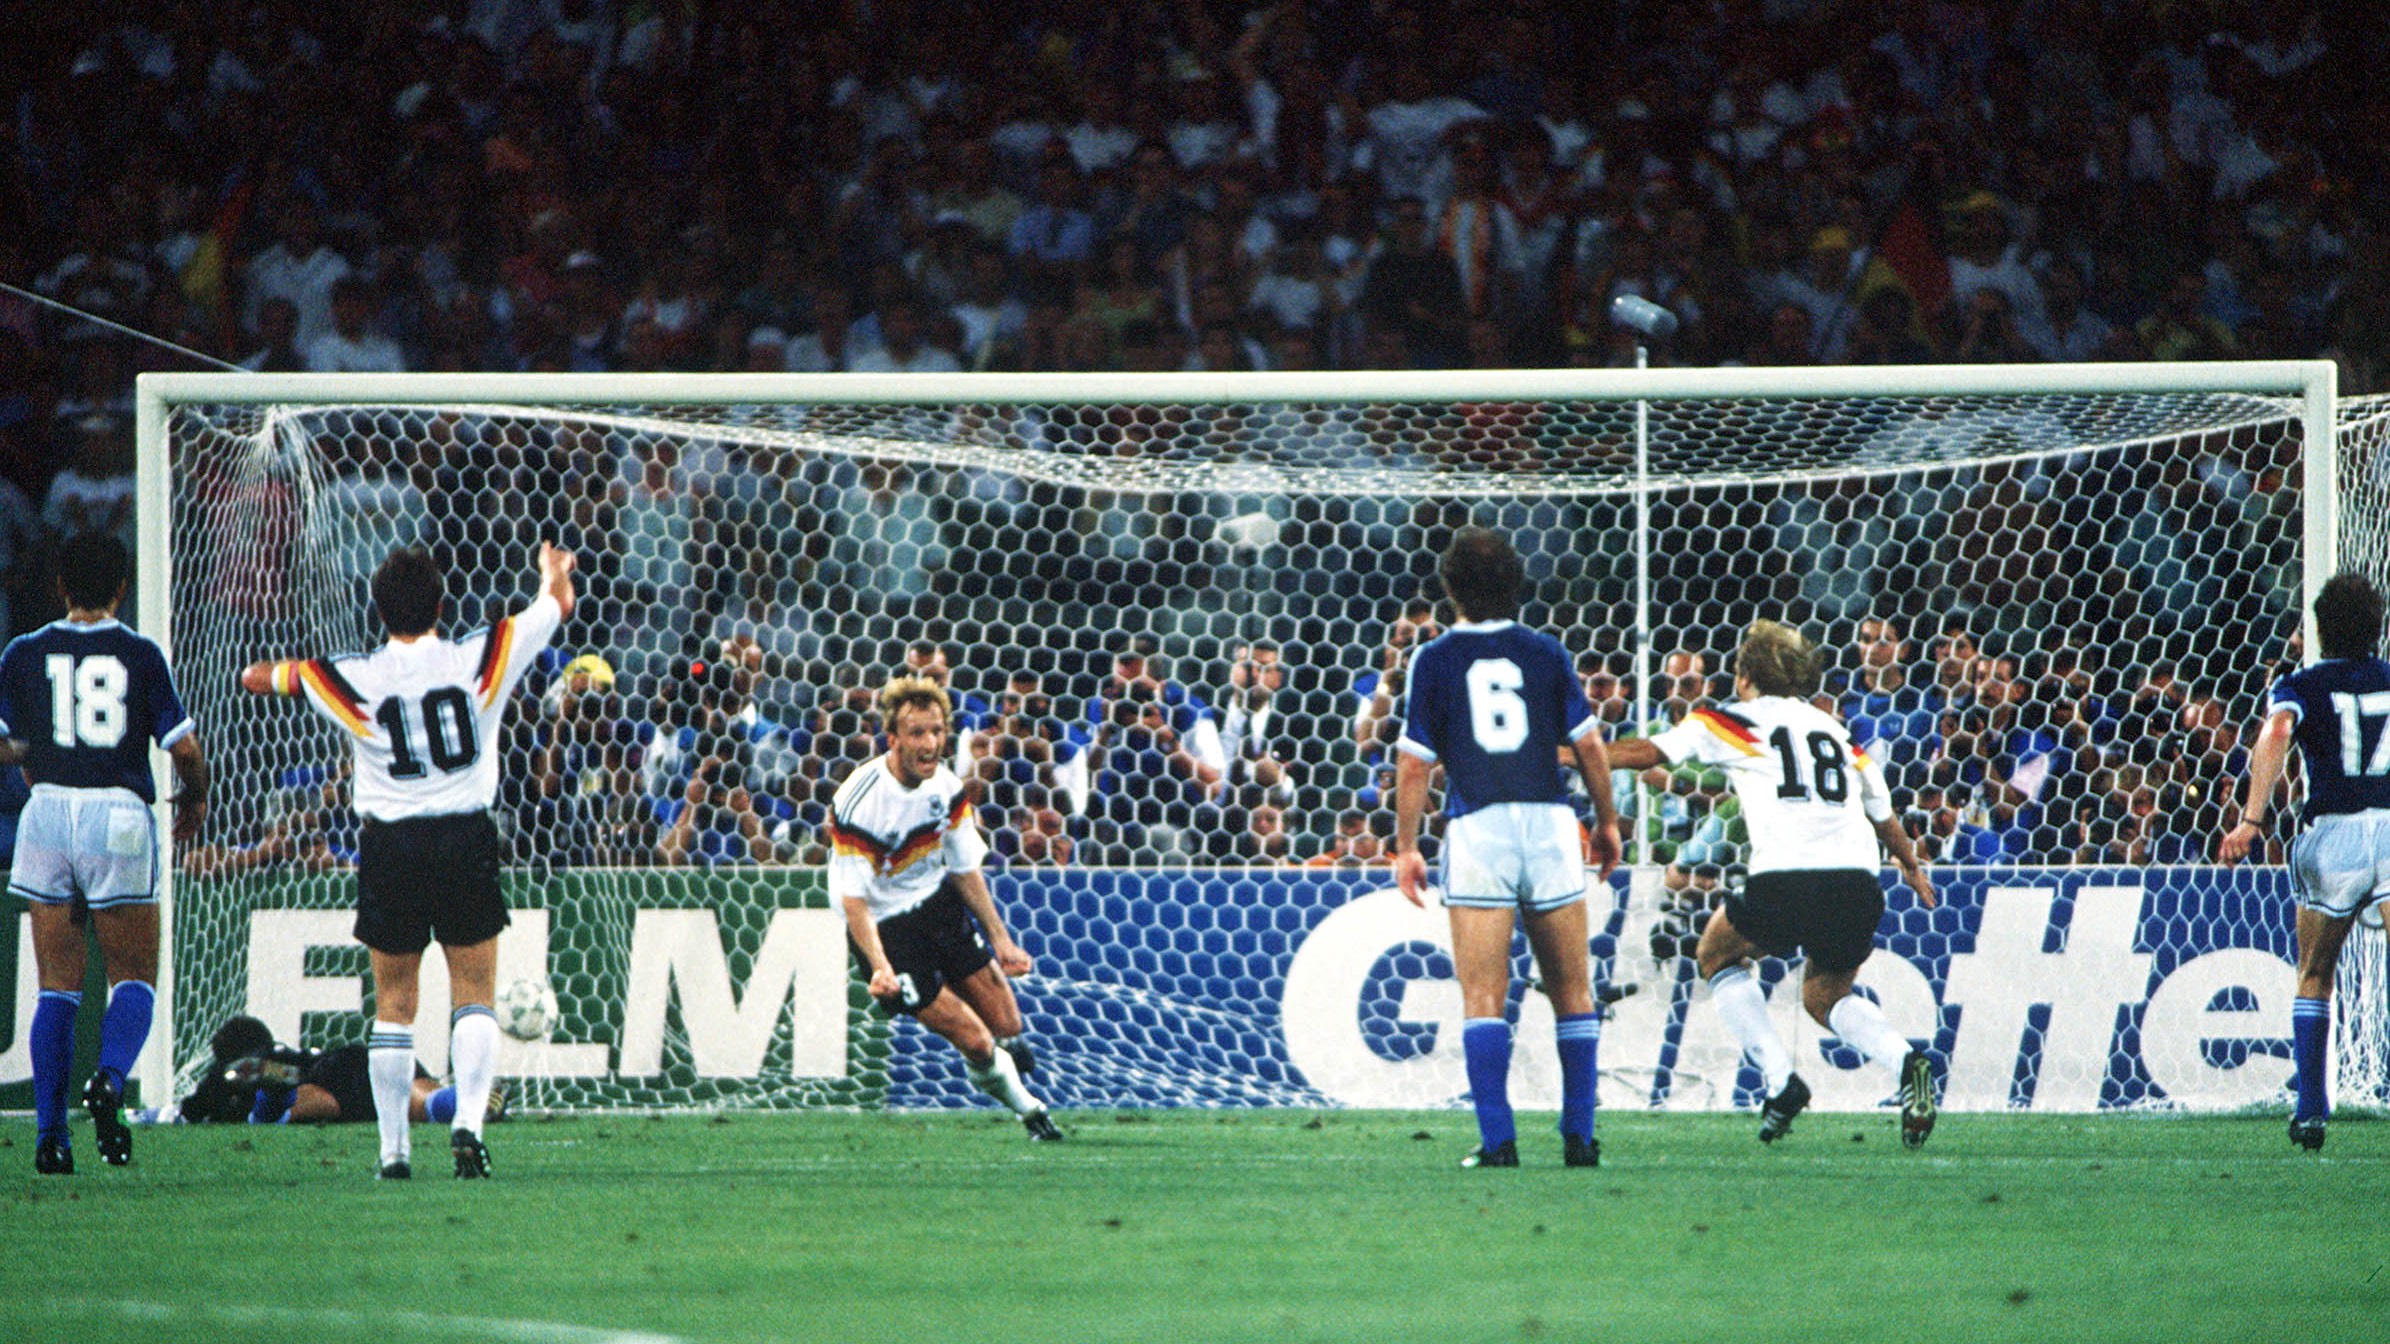 There's pressure, sure, but it's a single action" – Andreas Brehme on why  Germany are so good at penalties | FourFourTwo